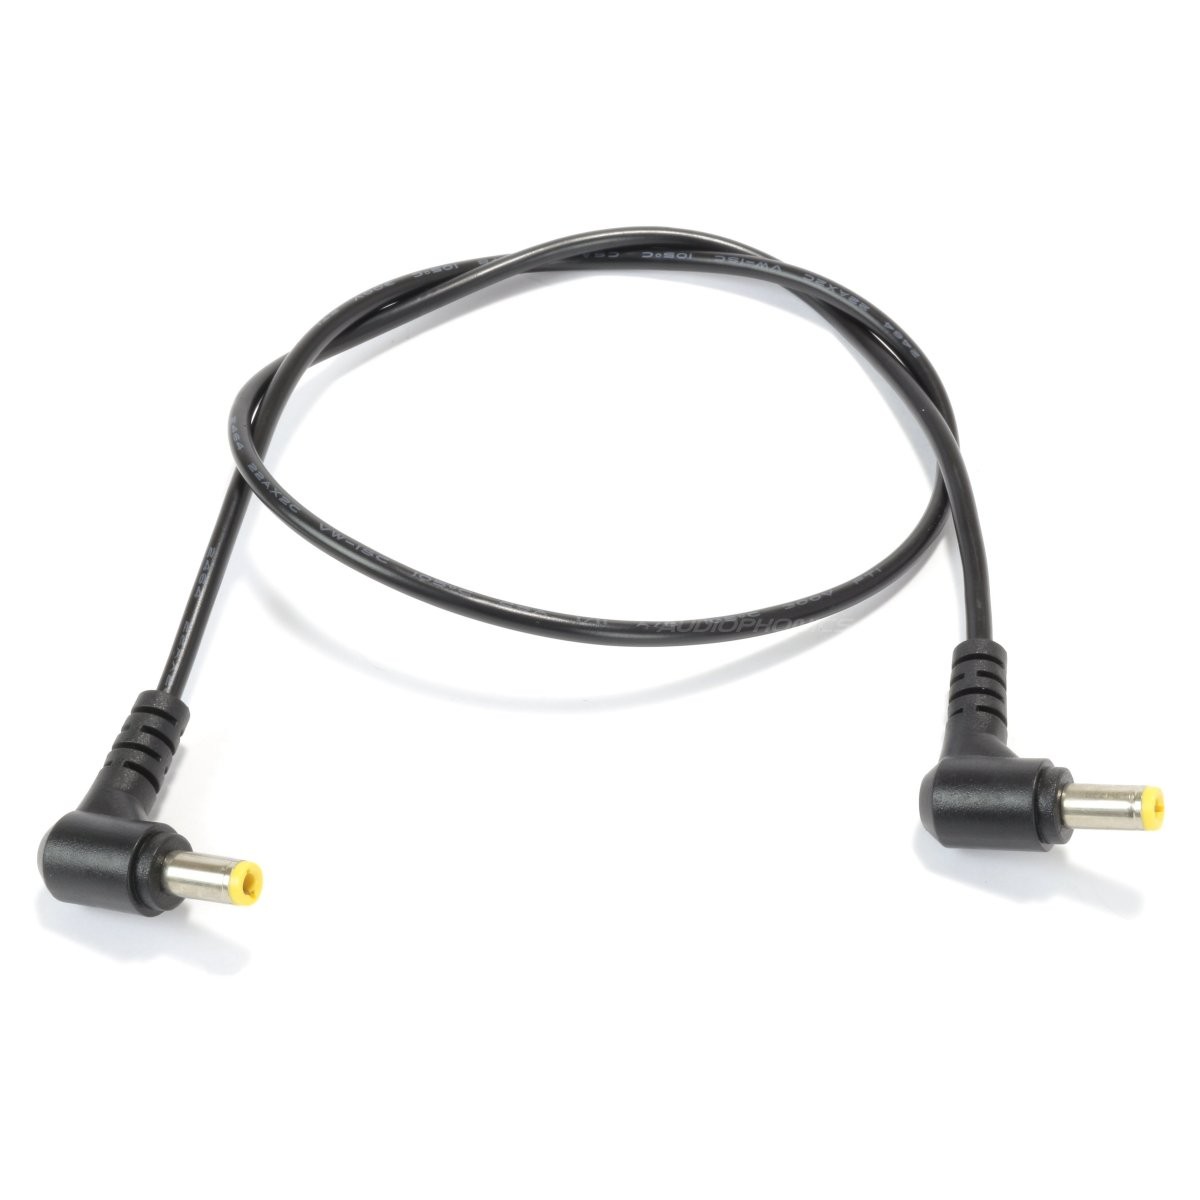 Angled DC male Jack to DC male Jack 5.5 / 2.5mm - 5.5 / 2.1mm 28AWG 60cm